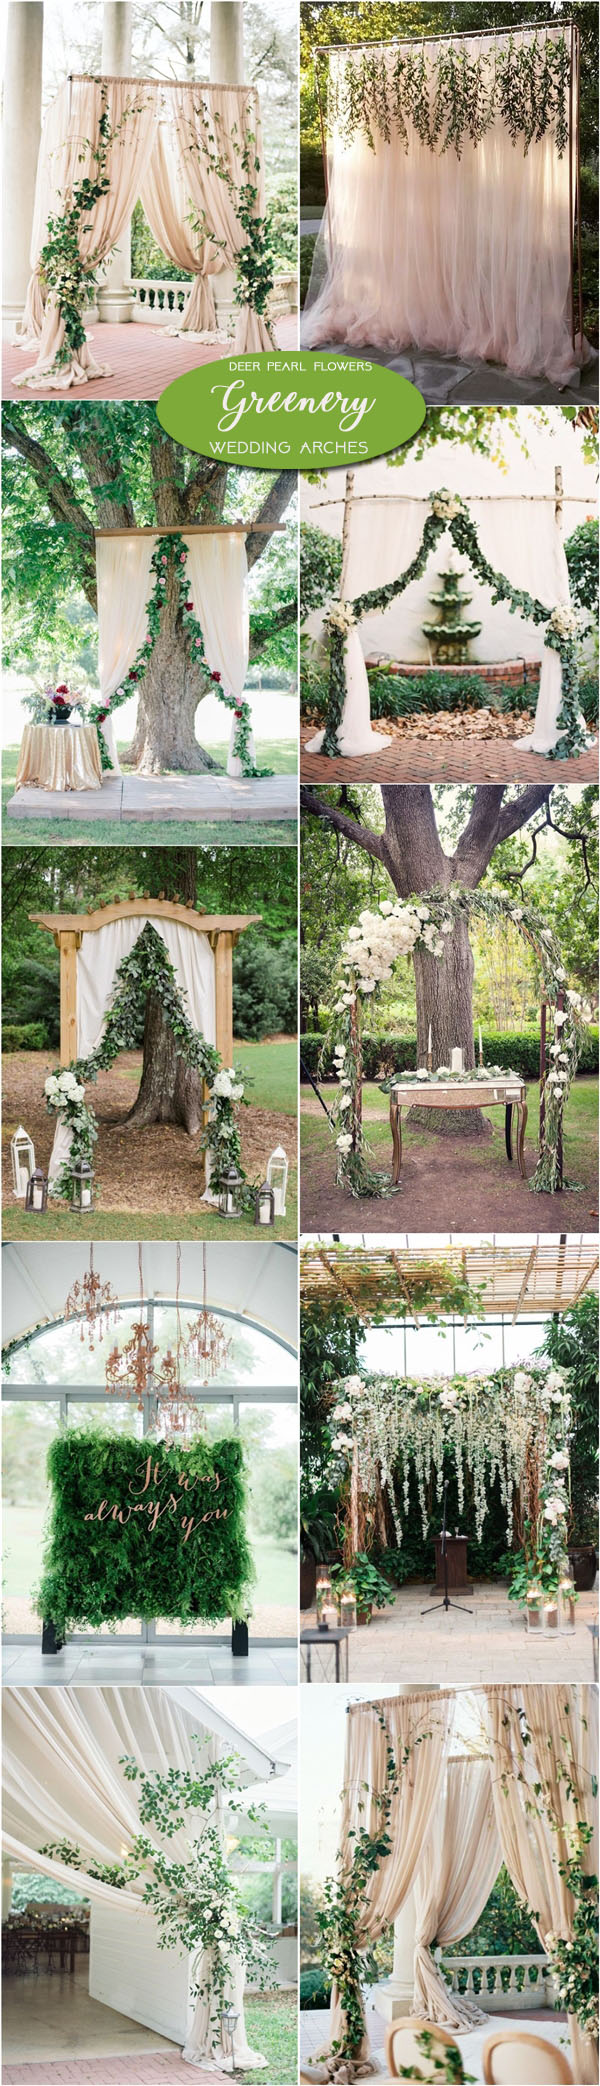 Neutral greenery wedding arch and alter ideas